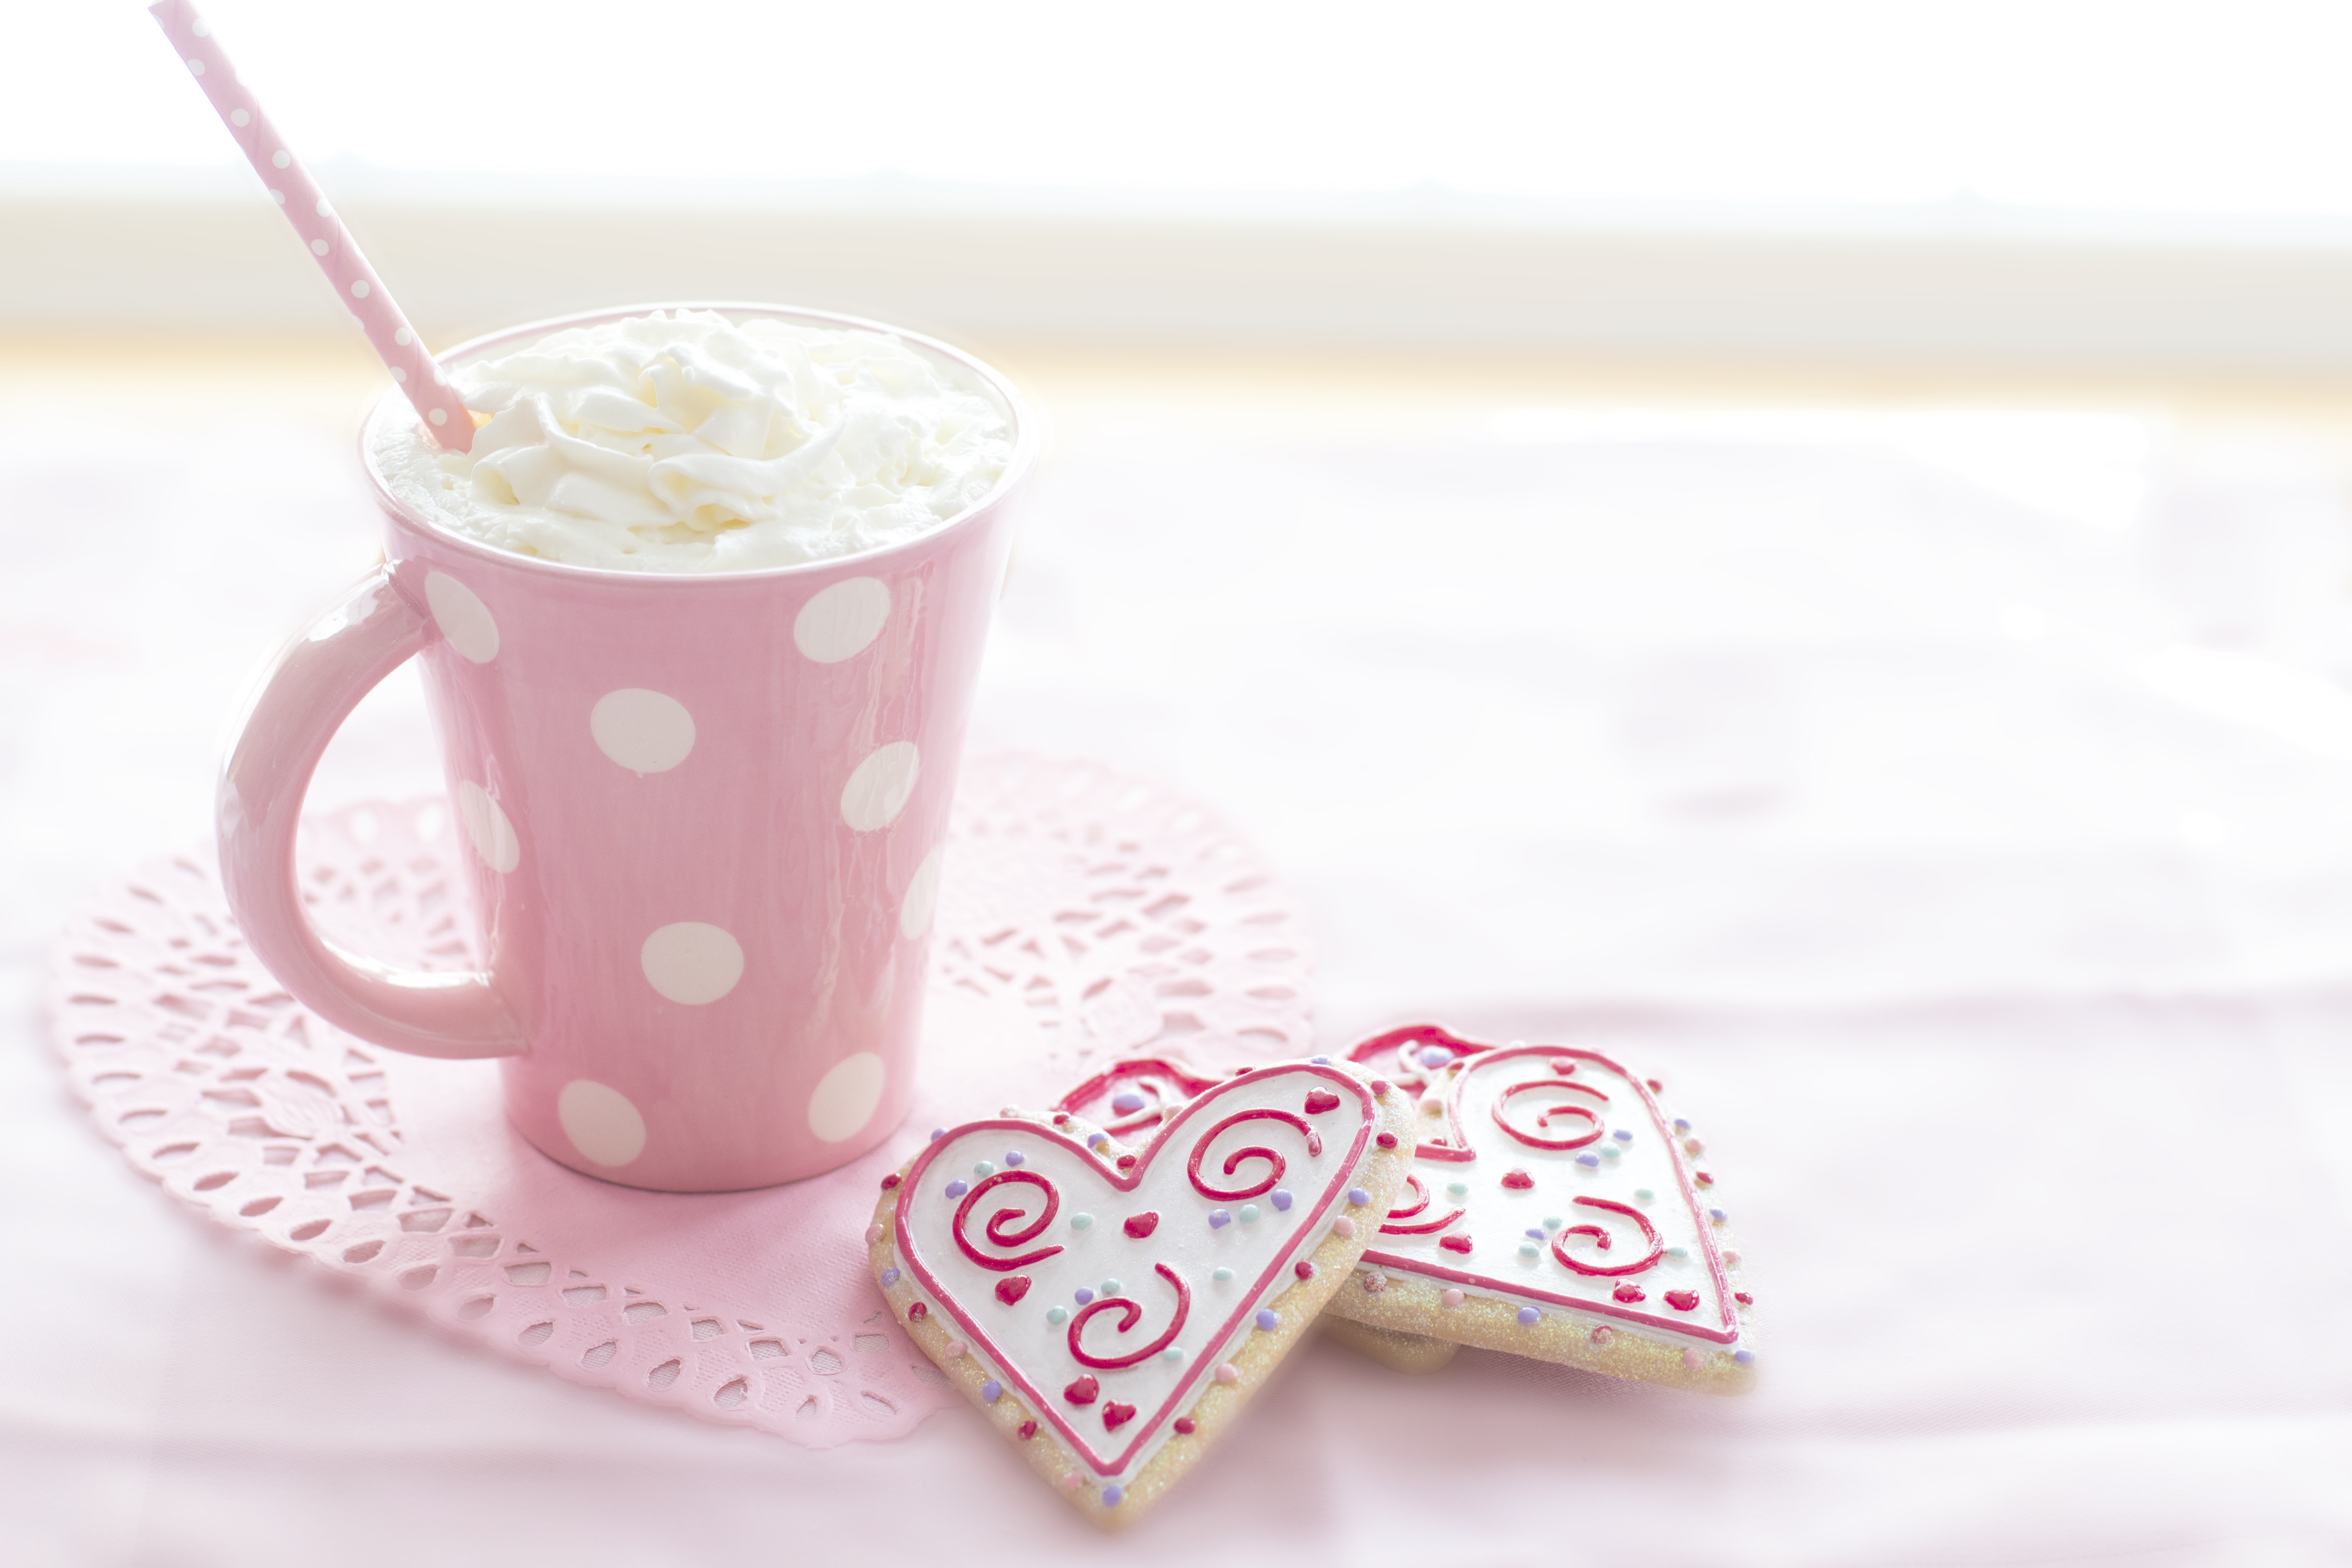 Hot Chocolate Drink Cookie Heart Shaped Pink Cream 5184x3456